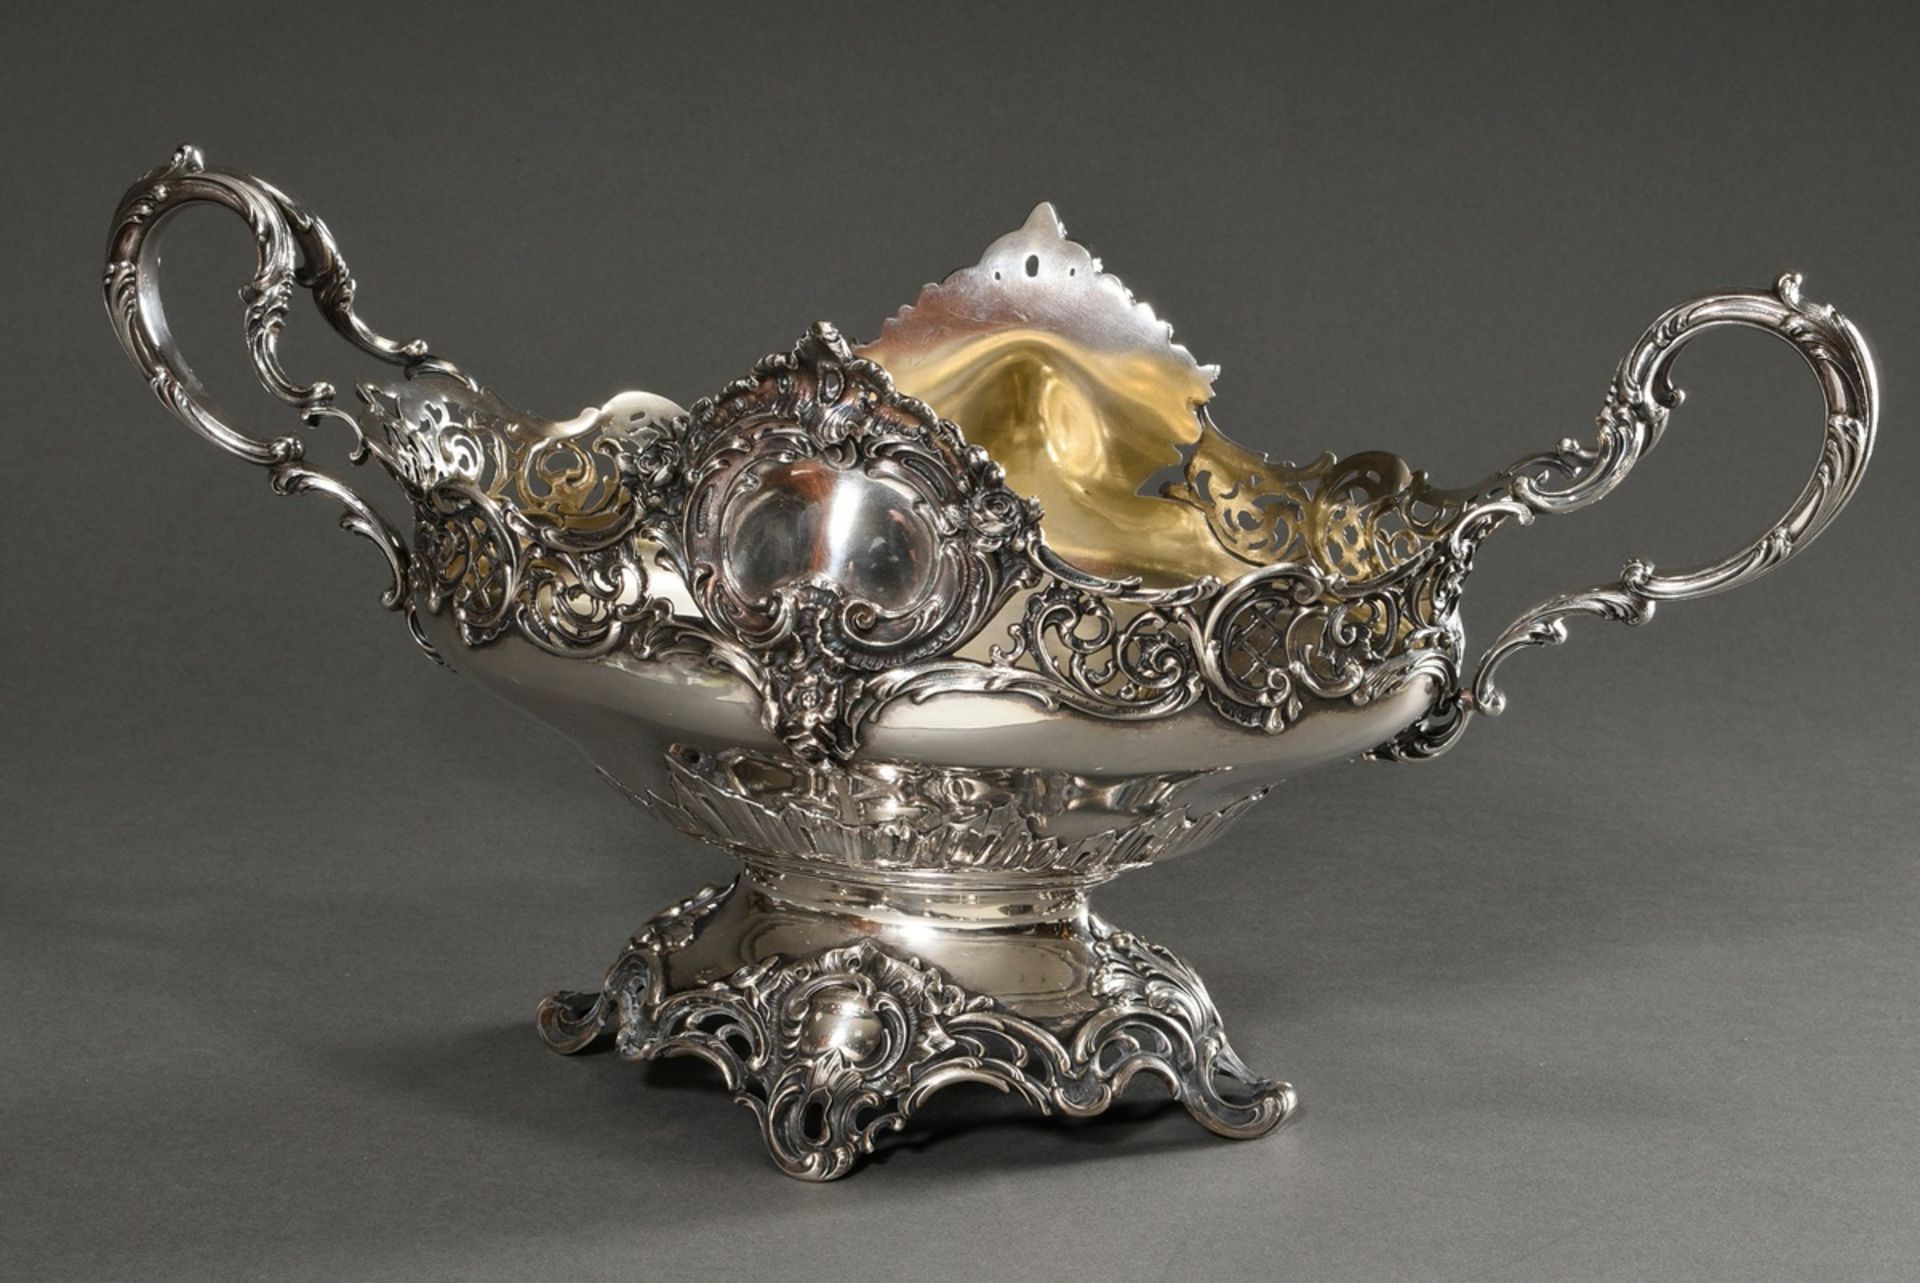 Opulent centerpiece with rocaille decoration, silver 800, 1197g, 24,5x50x22cm, without glass insert - Image 2 of 9